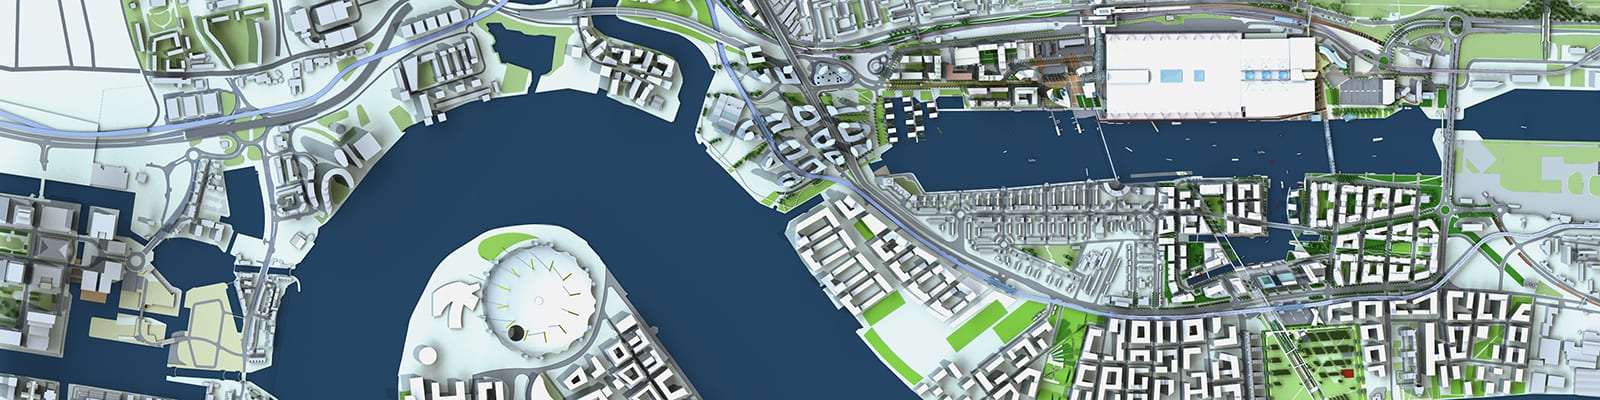 Aerial view rendering of the London Docklands.